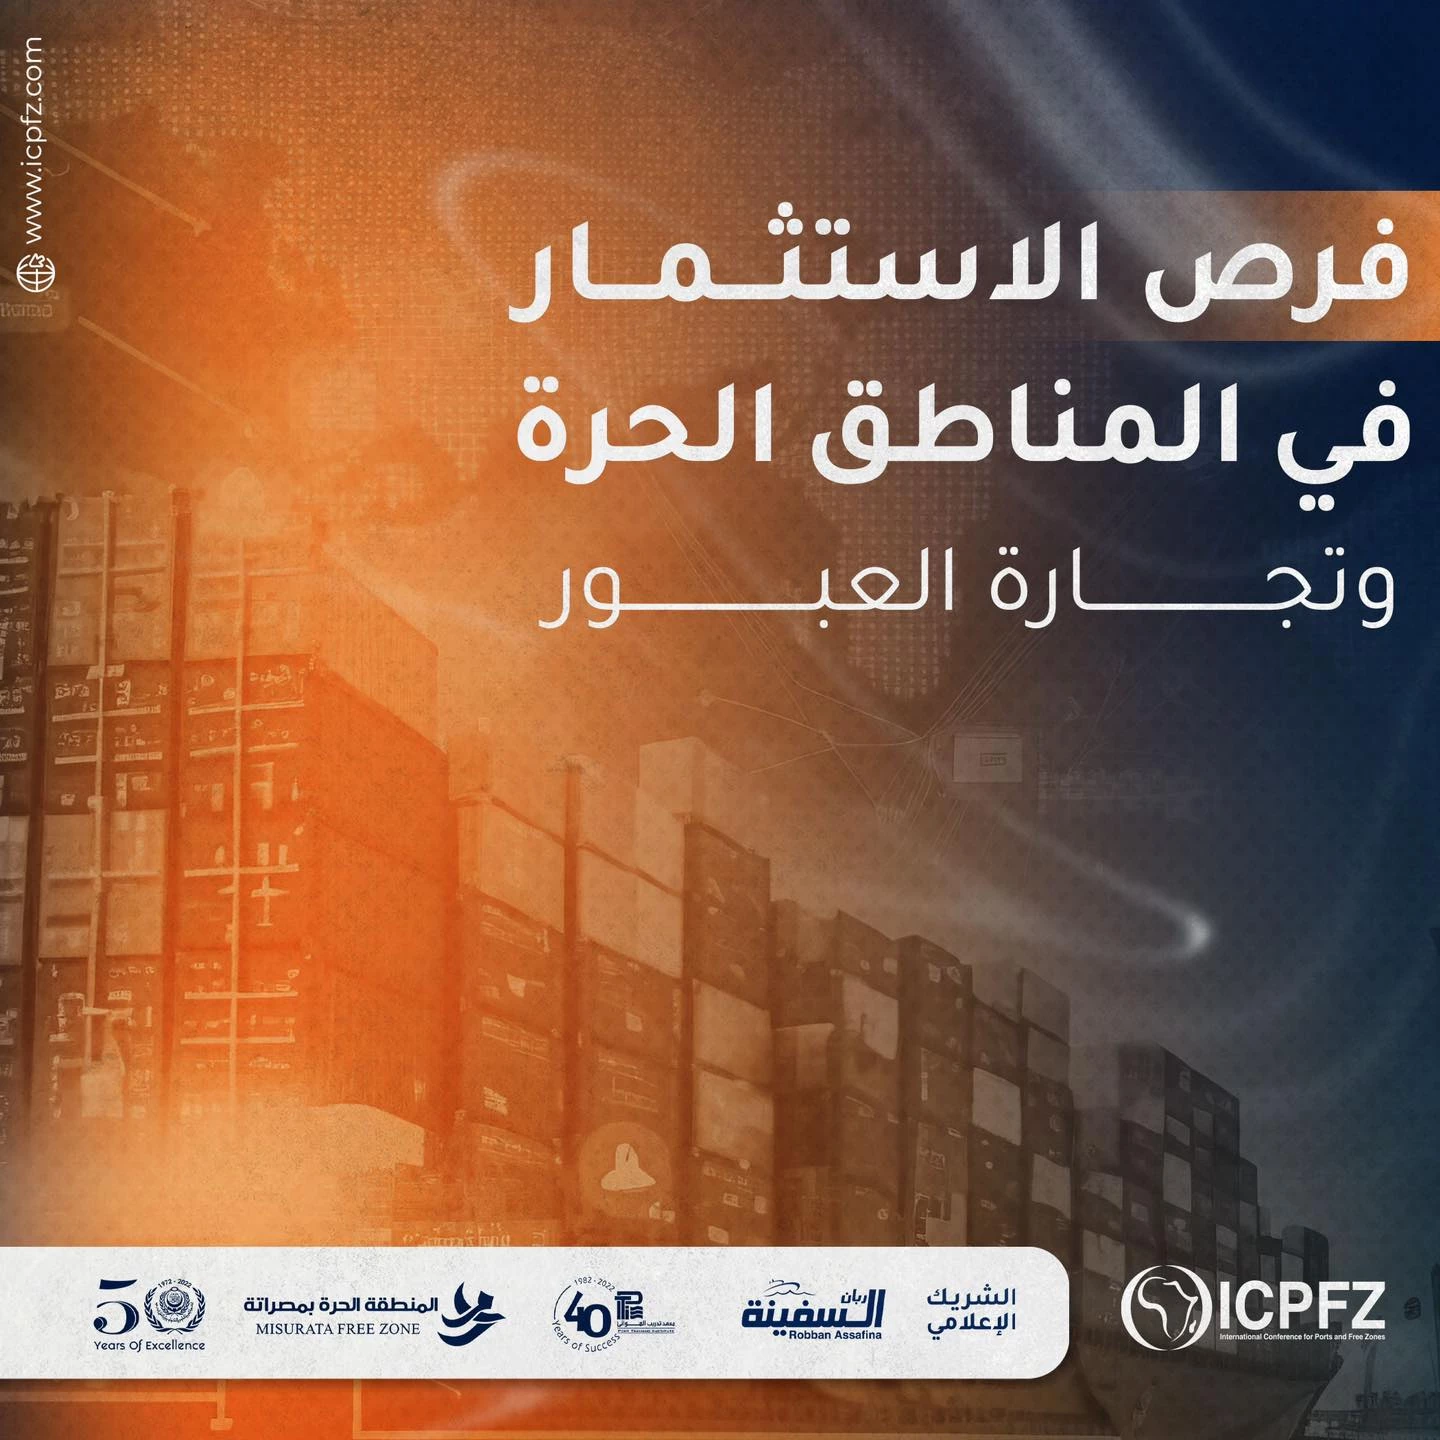 The International North African Ports and Free Zones Conference and Exhibition4